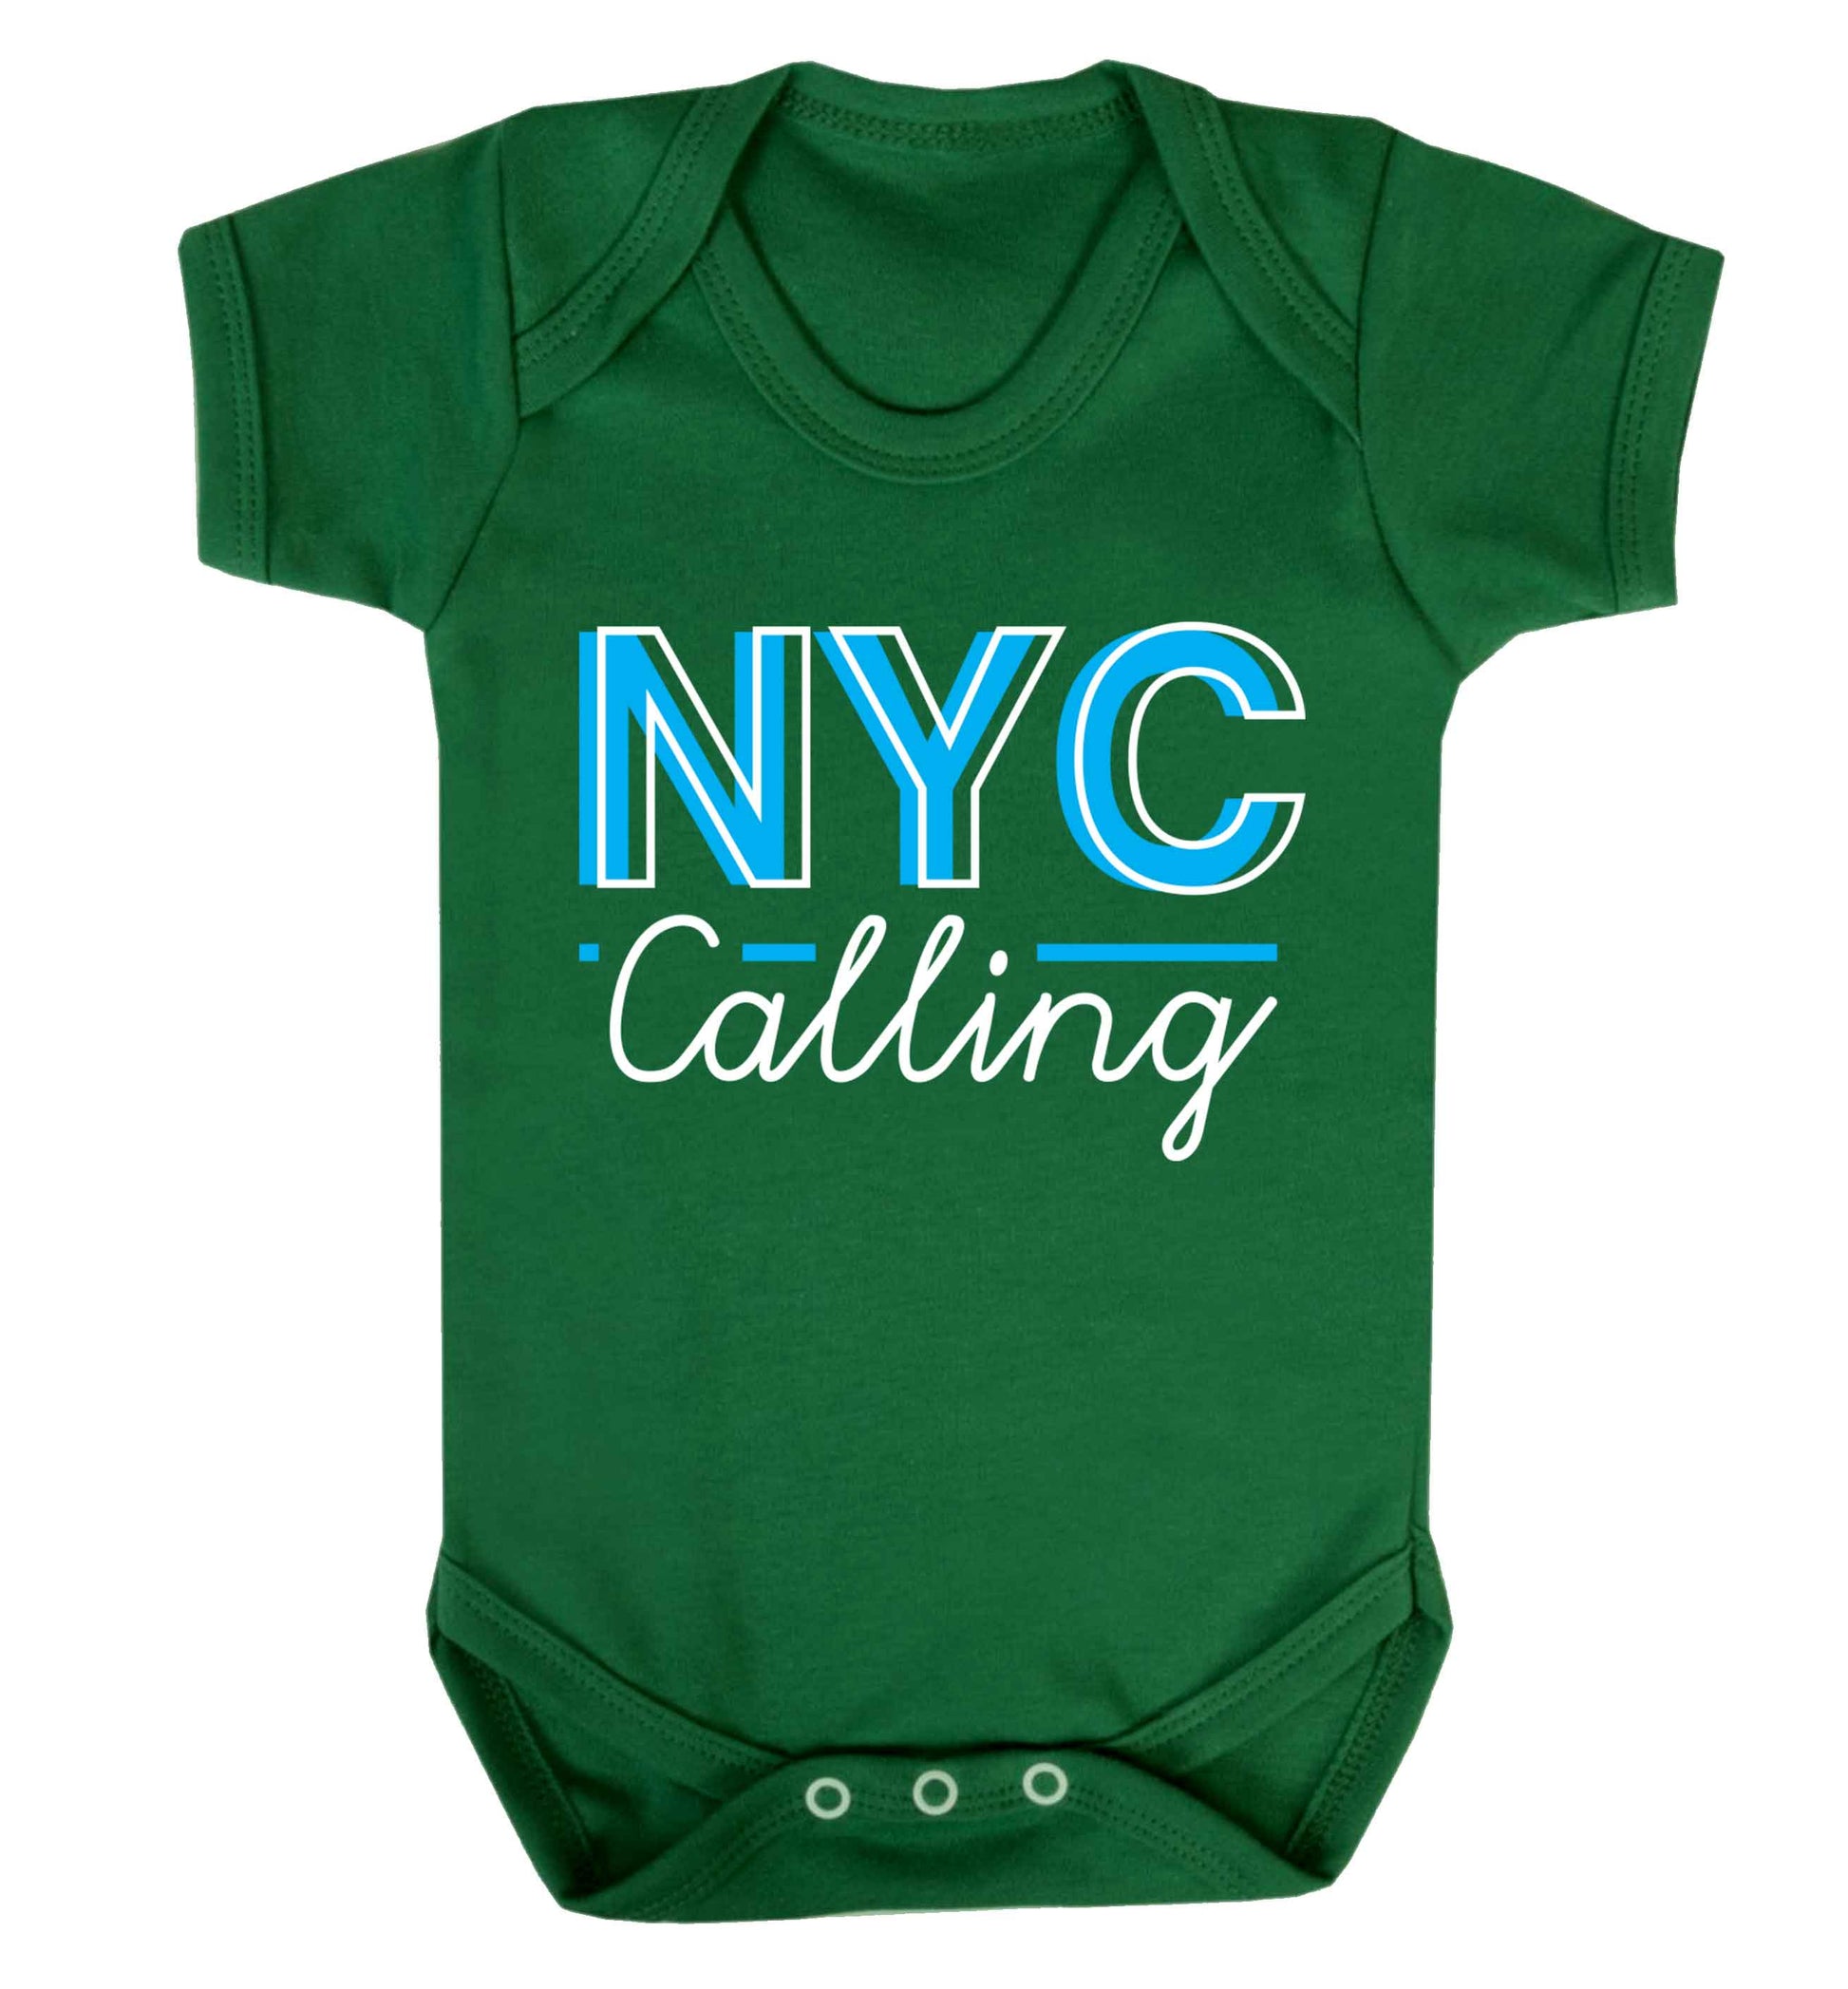 NYC calling Baby Vest green 18-24 months